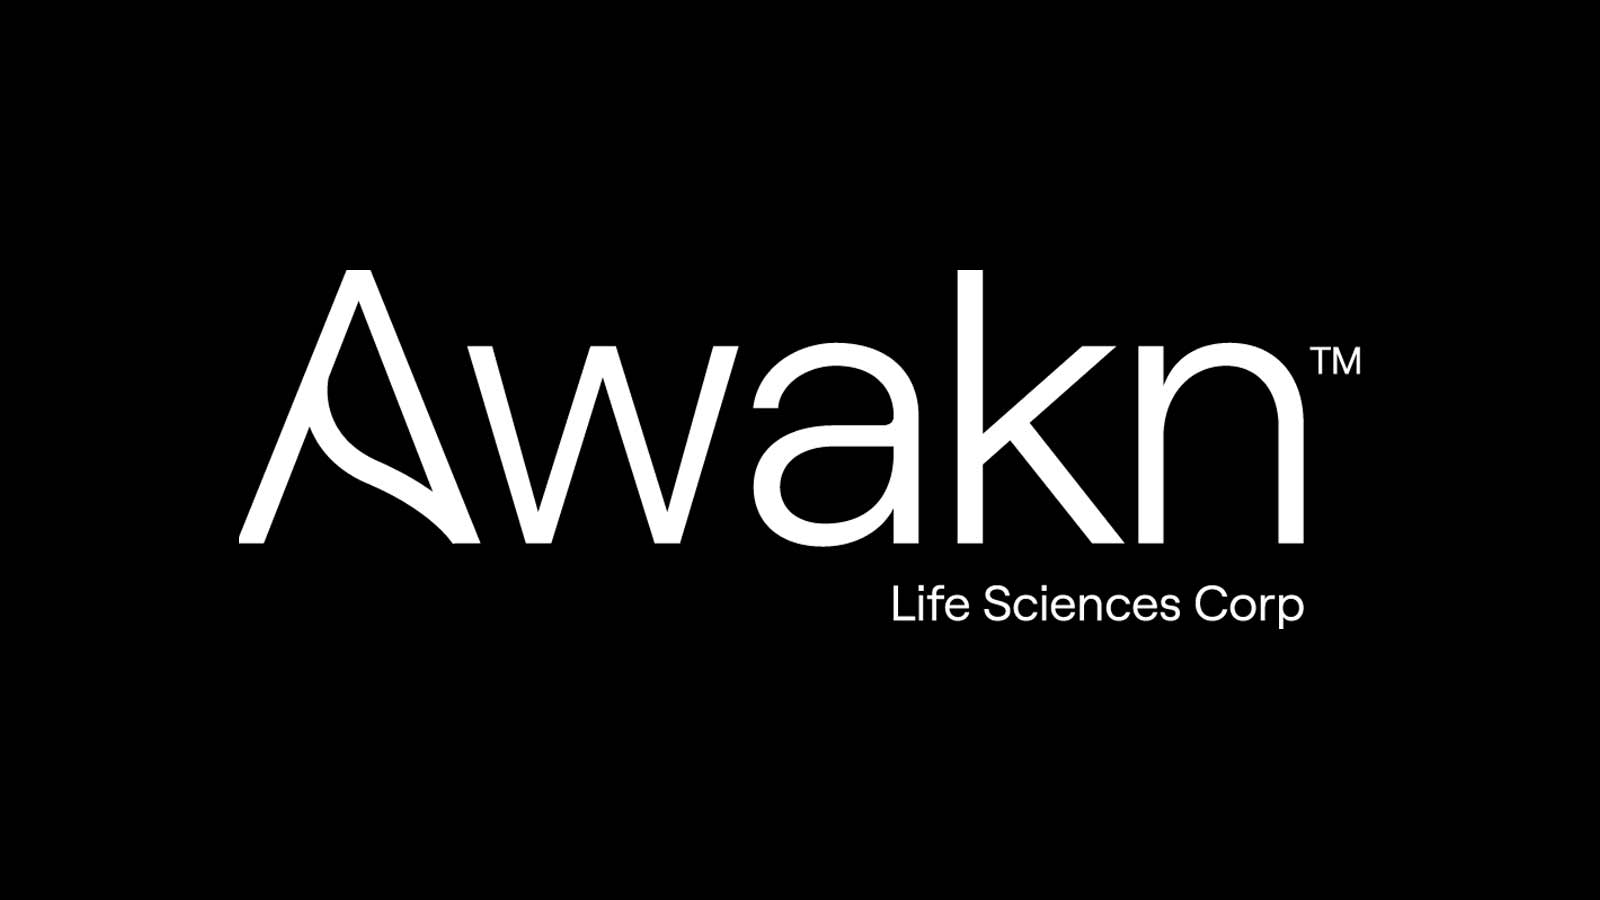 Awakn Life Sciences Corp Earns Global AUD Treatment Interest With A New Class Of Psychedelics-Based Therapeutic ($AWKNF)